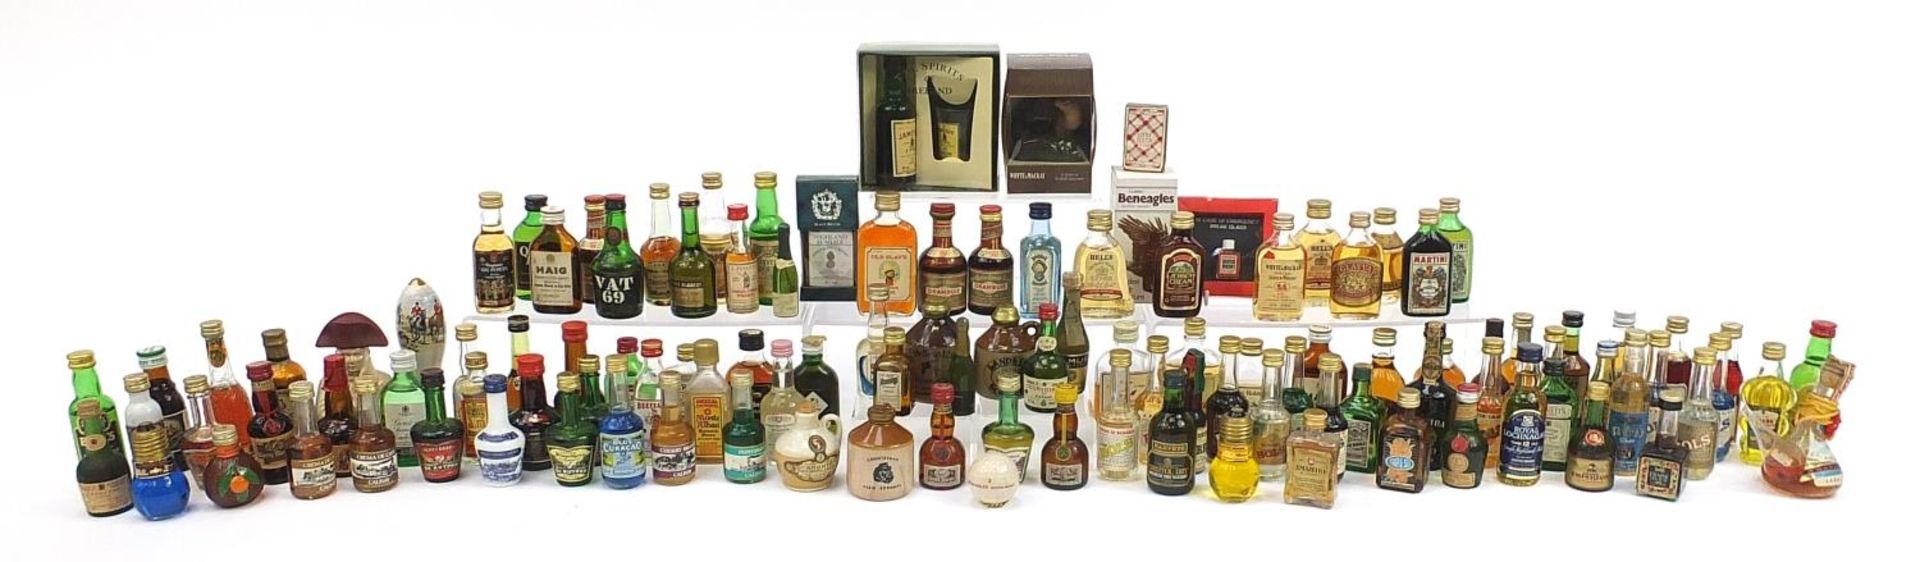 Large collection of alcohol miniatures including whiskeys - Haig, Bells, Old Slave Jamaica rum,